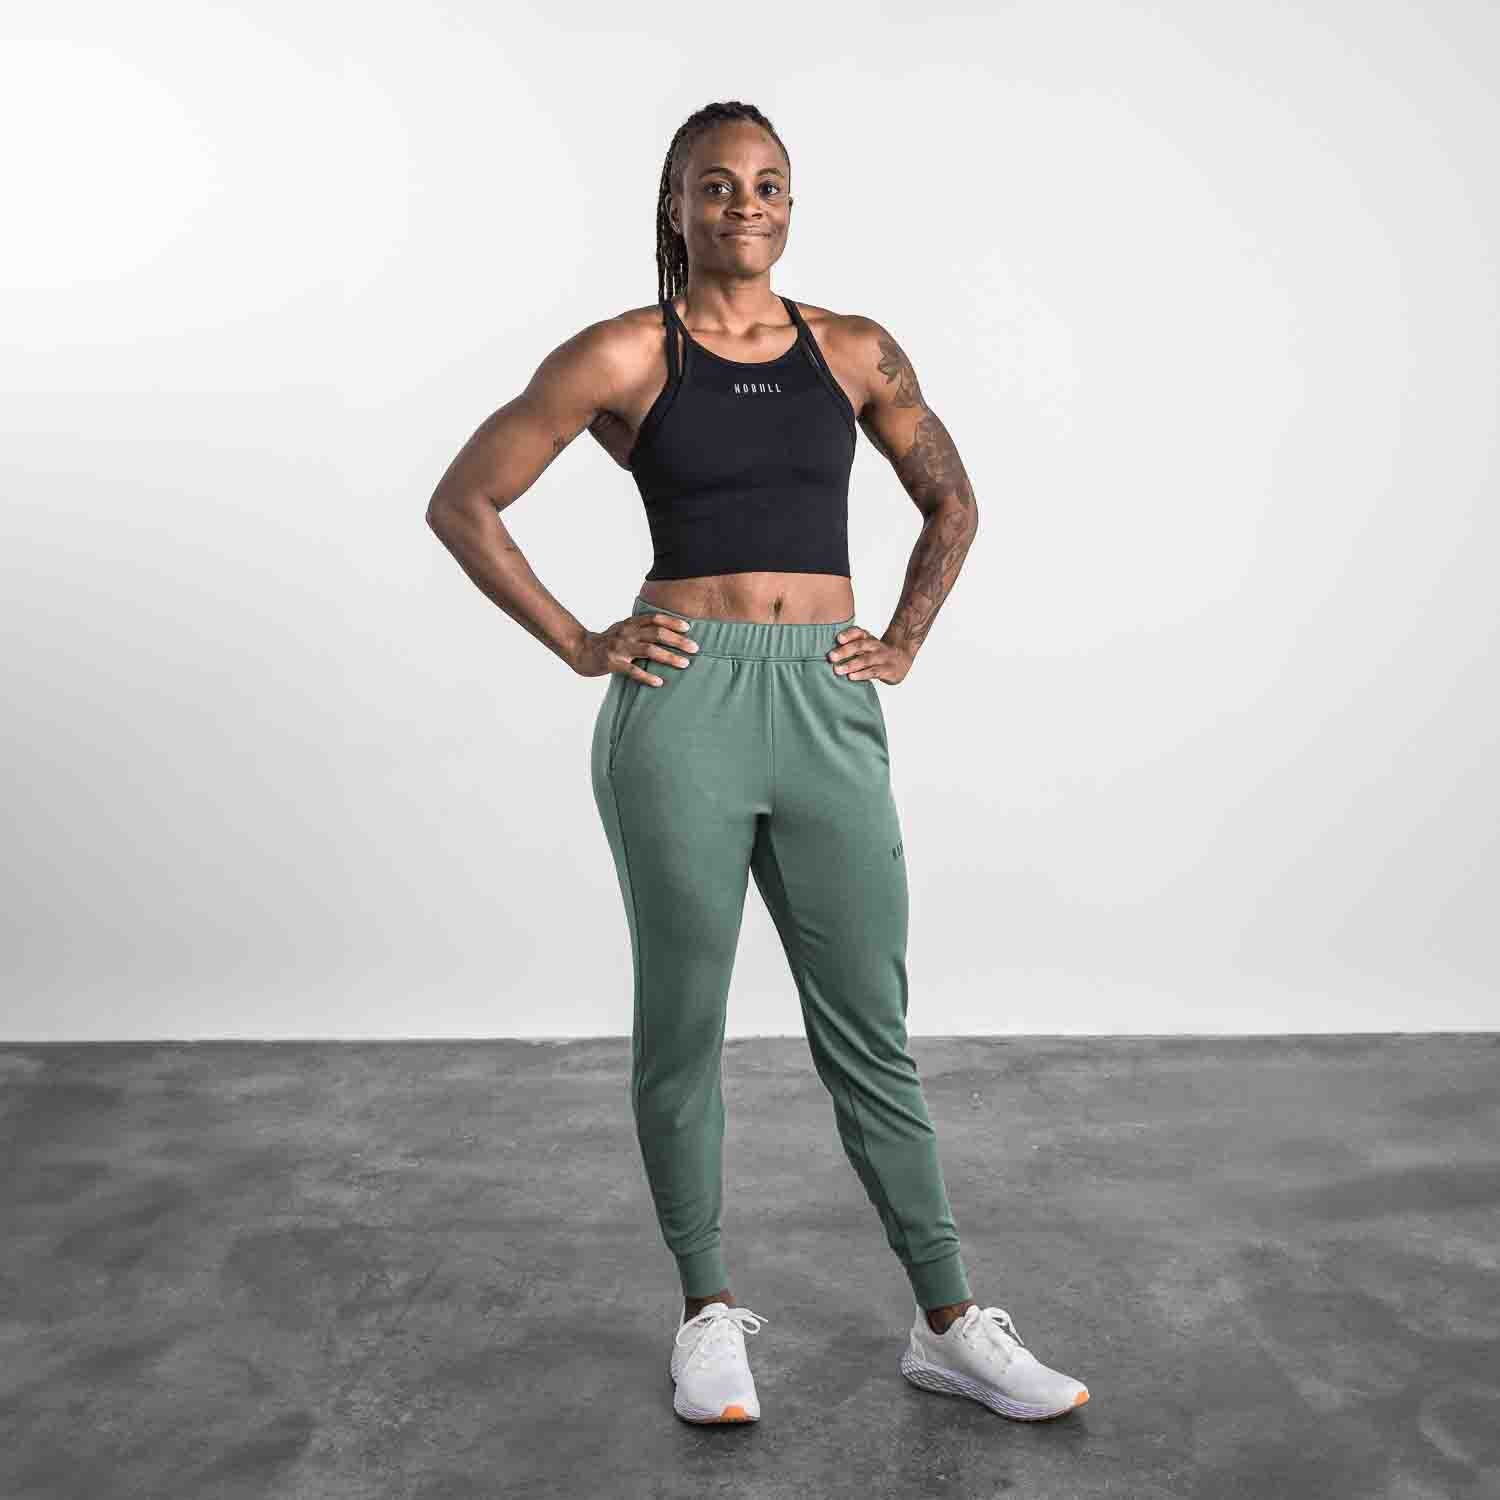 Comprar THE GYM PEOPLE Women's Joggers Pants Lightweight Athletic Leggings  Tapered Lounge Pants for Workout, Yoga, Running en USA desde Costa Rica